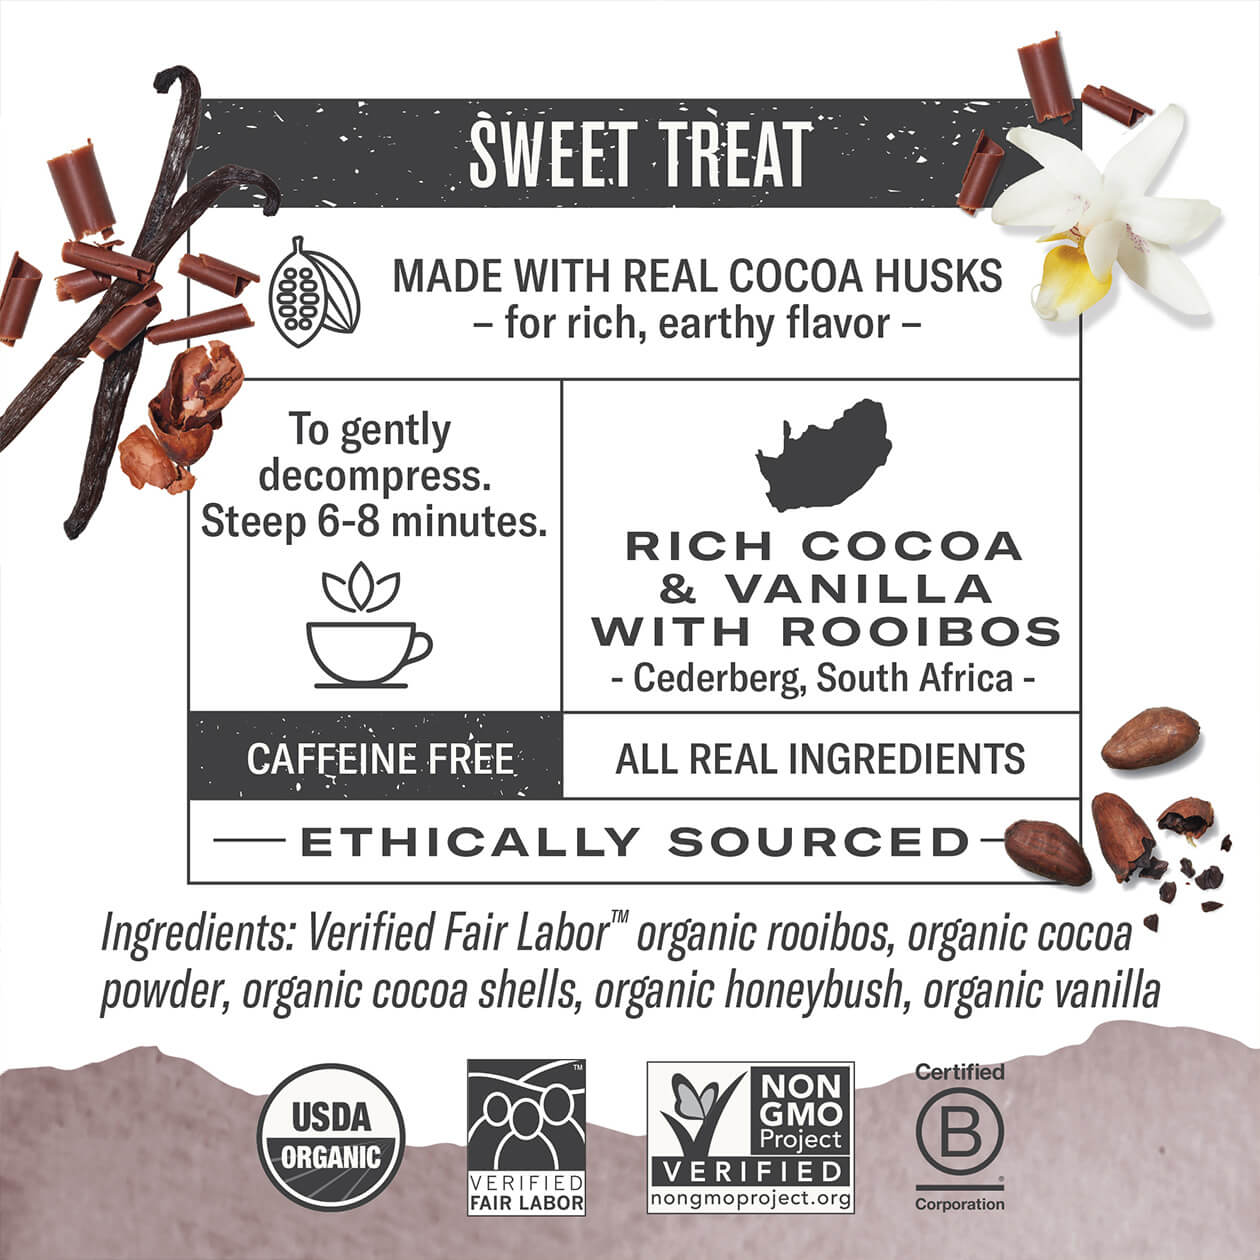 Infographic about Chocolate Rooibos: steep 6-8 minutes, origin: Cederberg South Africa, caffeine free, all real ingredients, ethically sourced